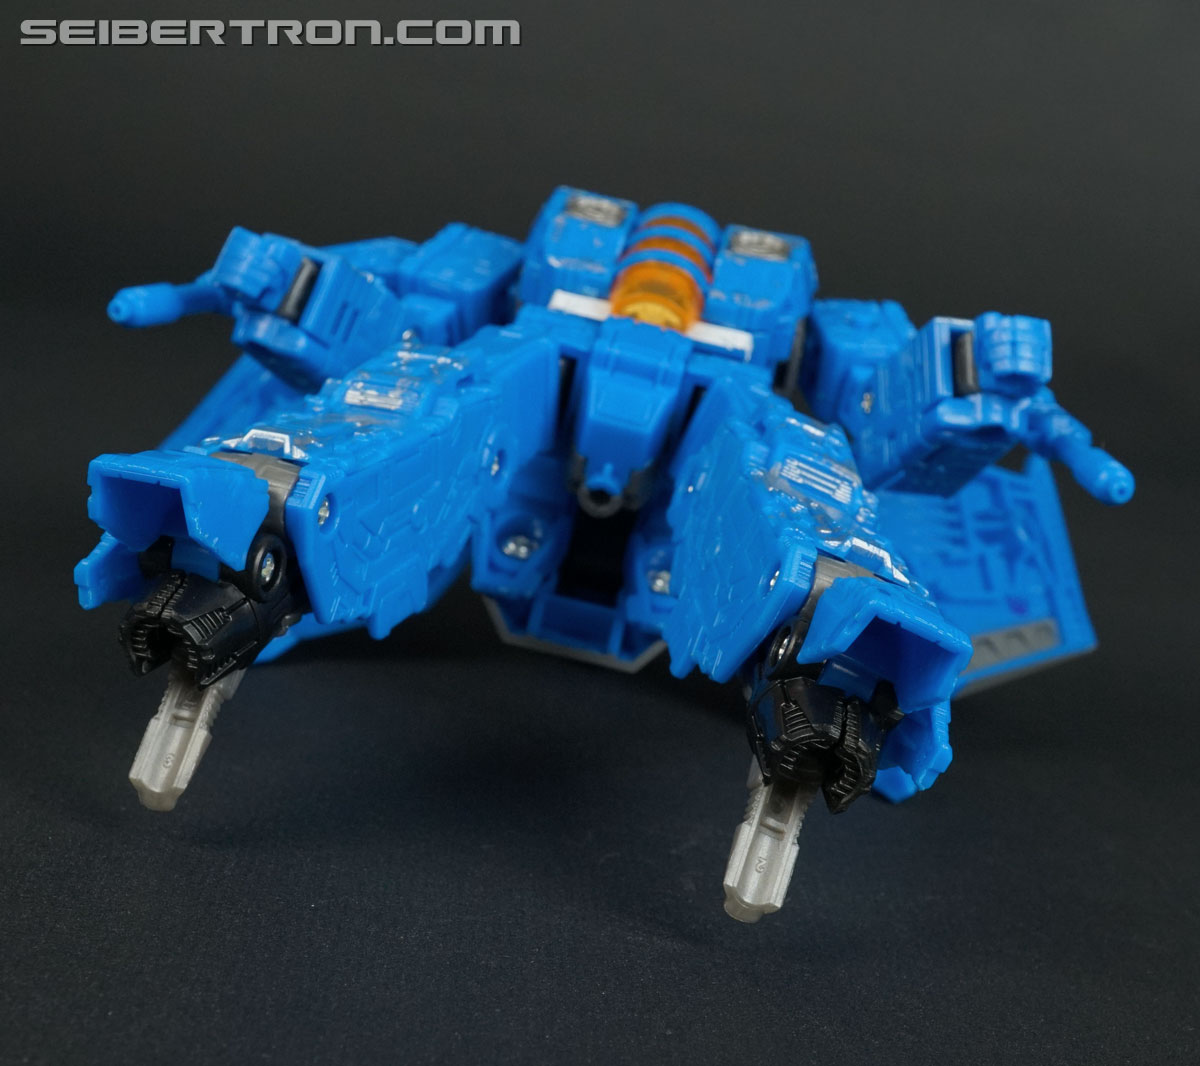 Transformers War for Cybertron: SIEGE Ion Storm (Seeker Ion Storm) (Image #69 of 111)